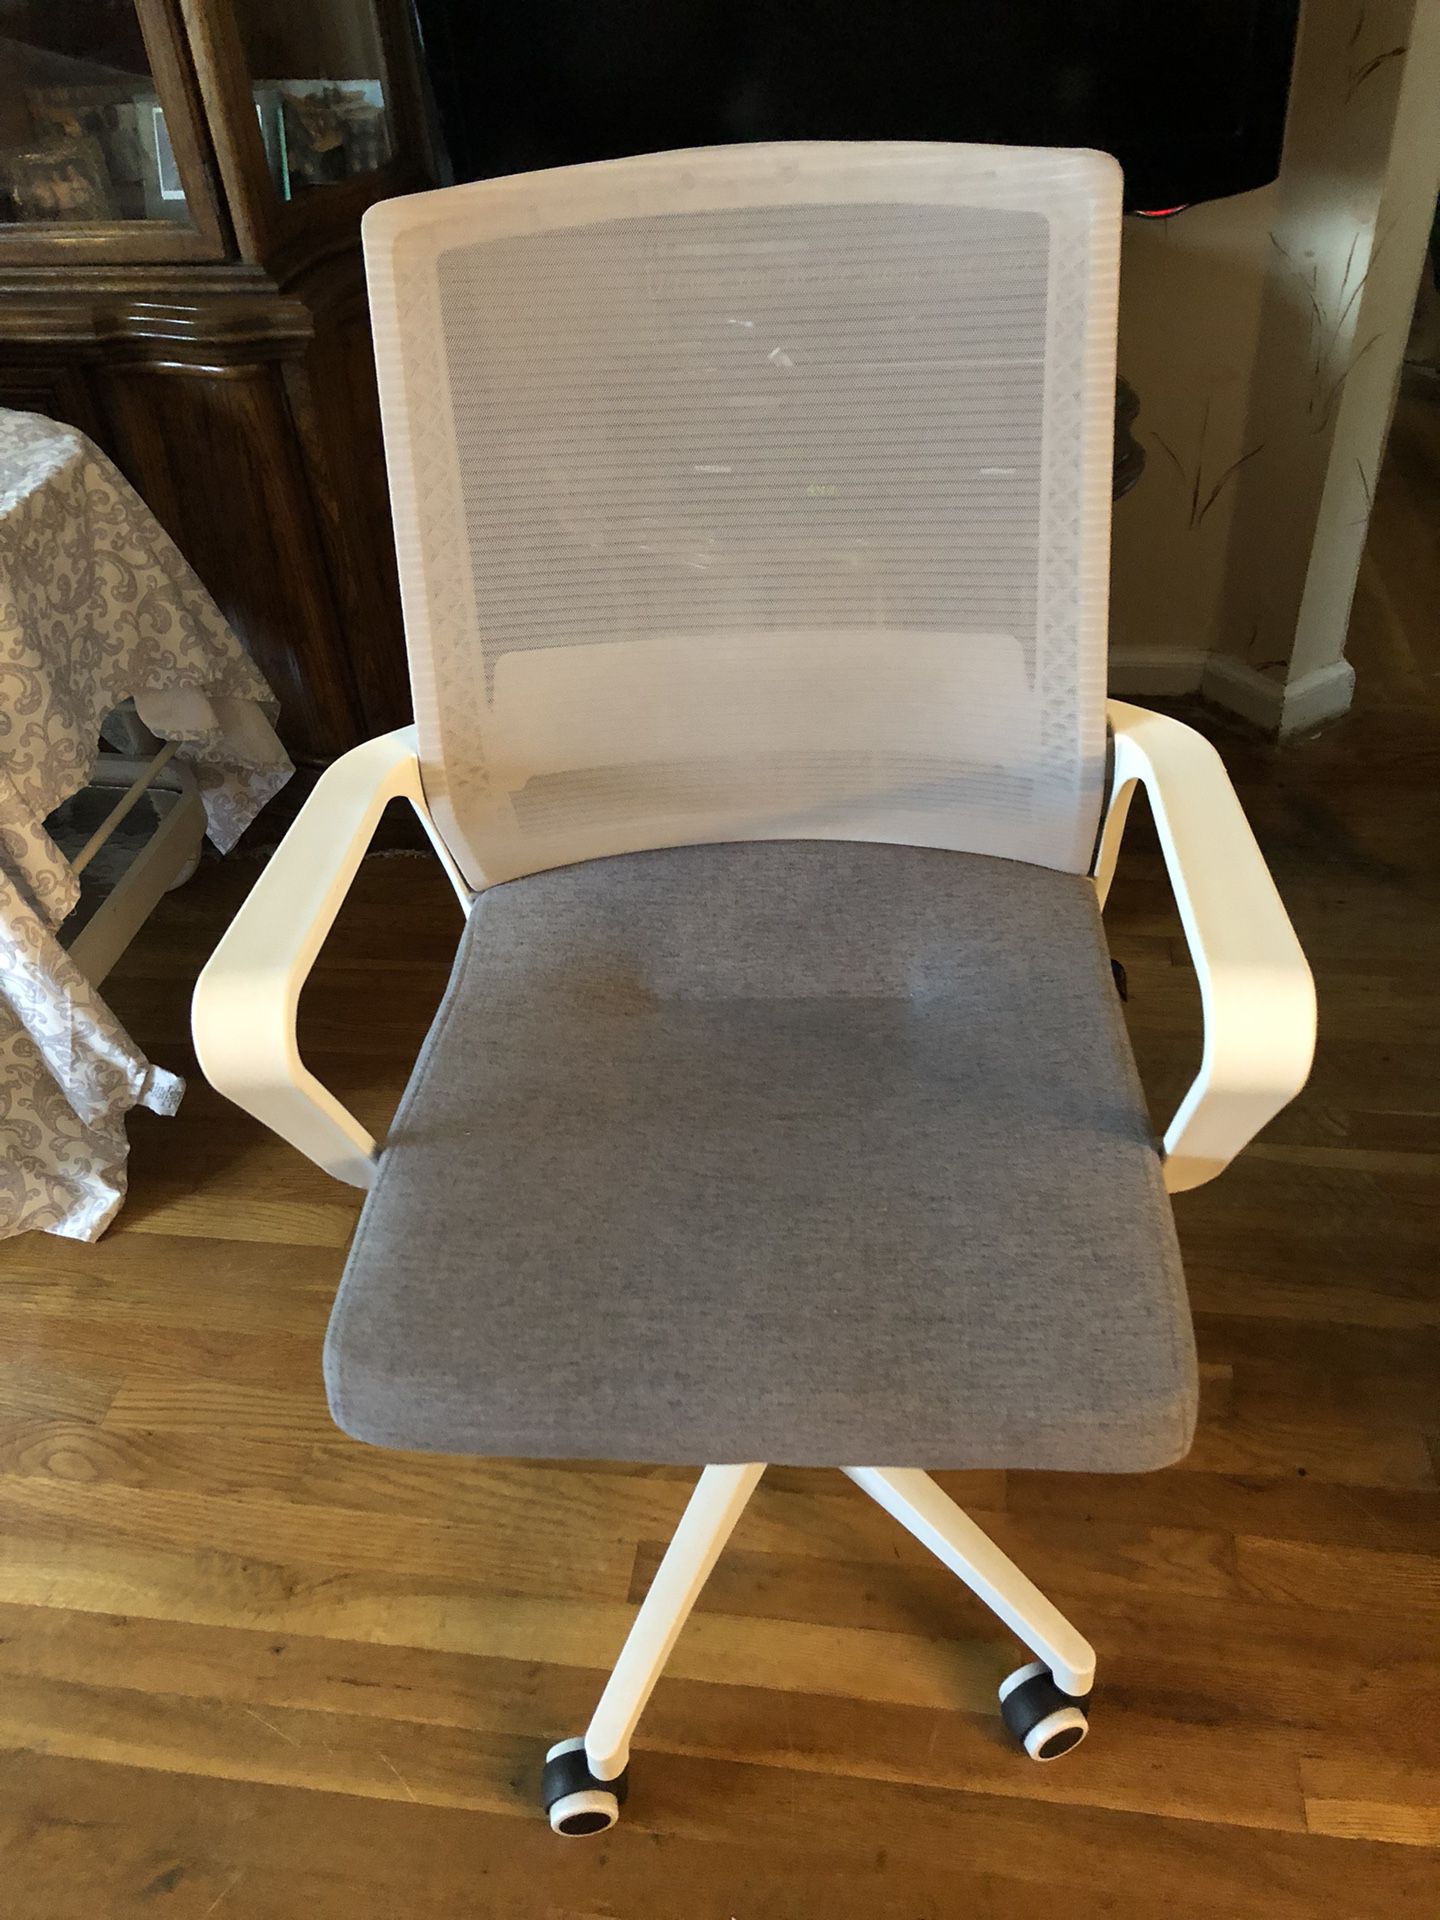 Practically New Neo Swivel Chair With Adjustable Position Up Or Down And Back